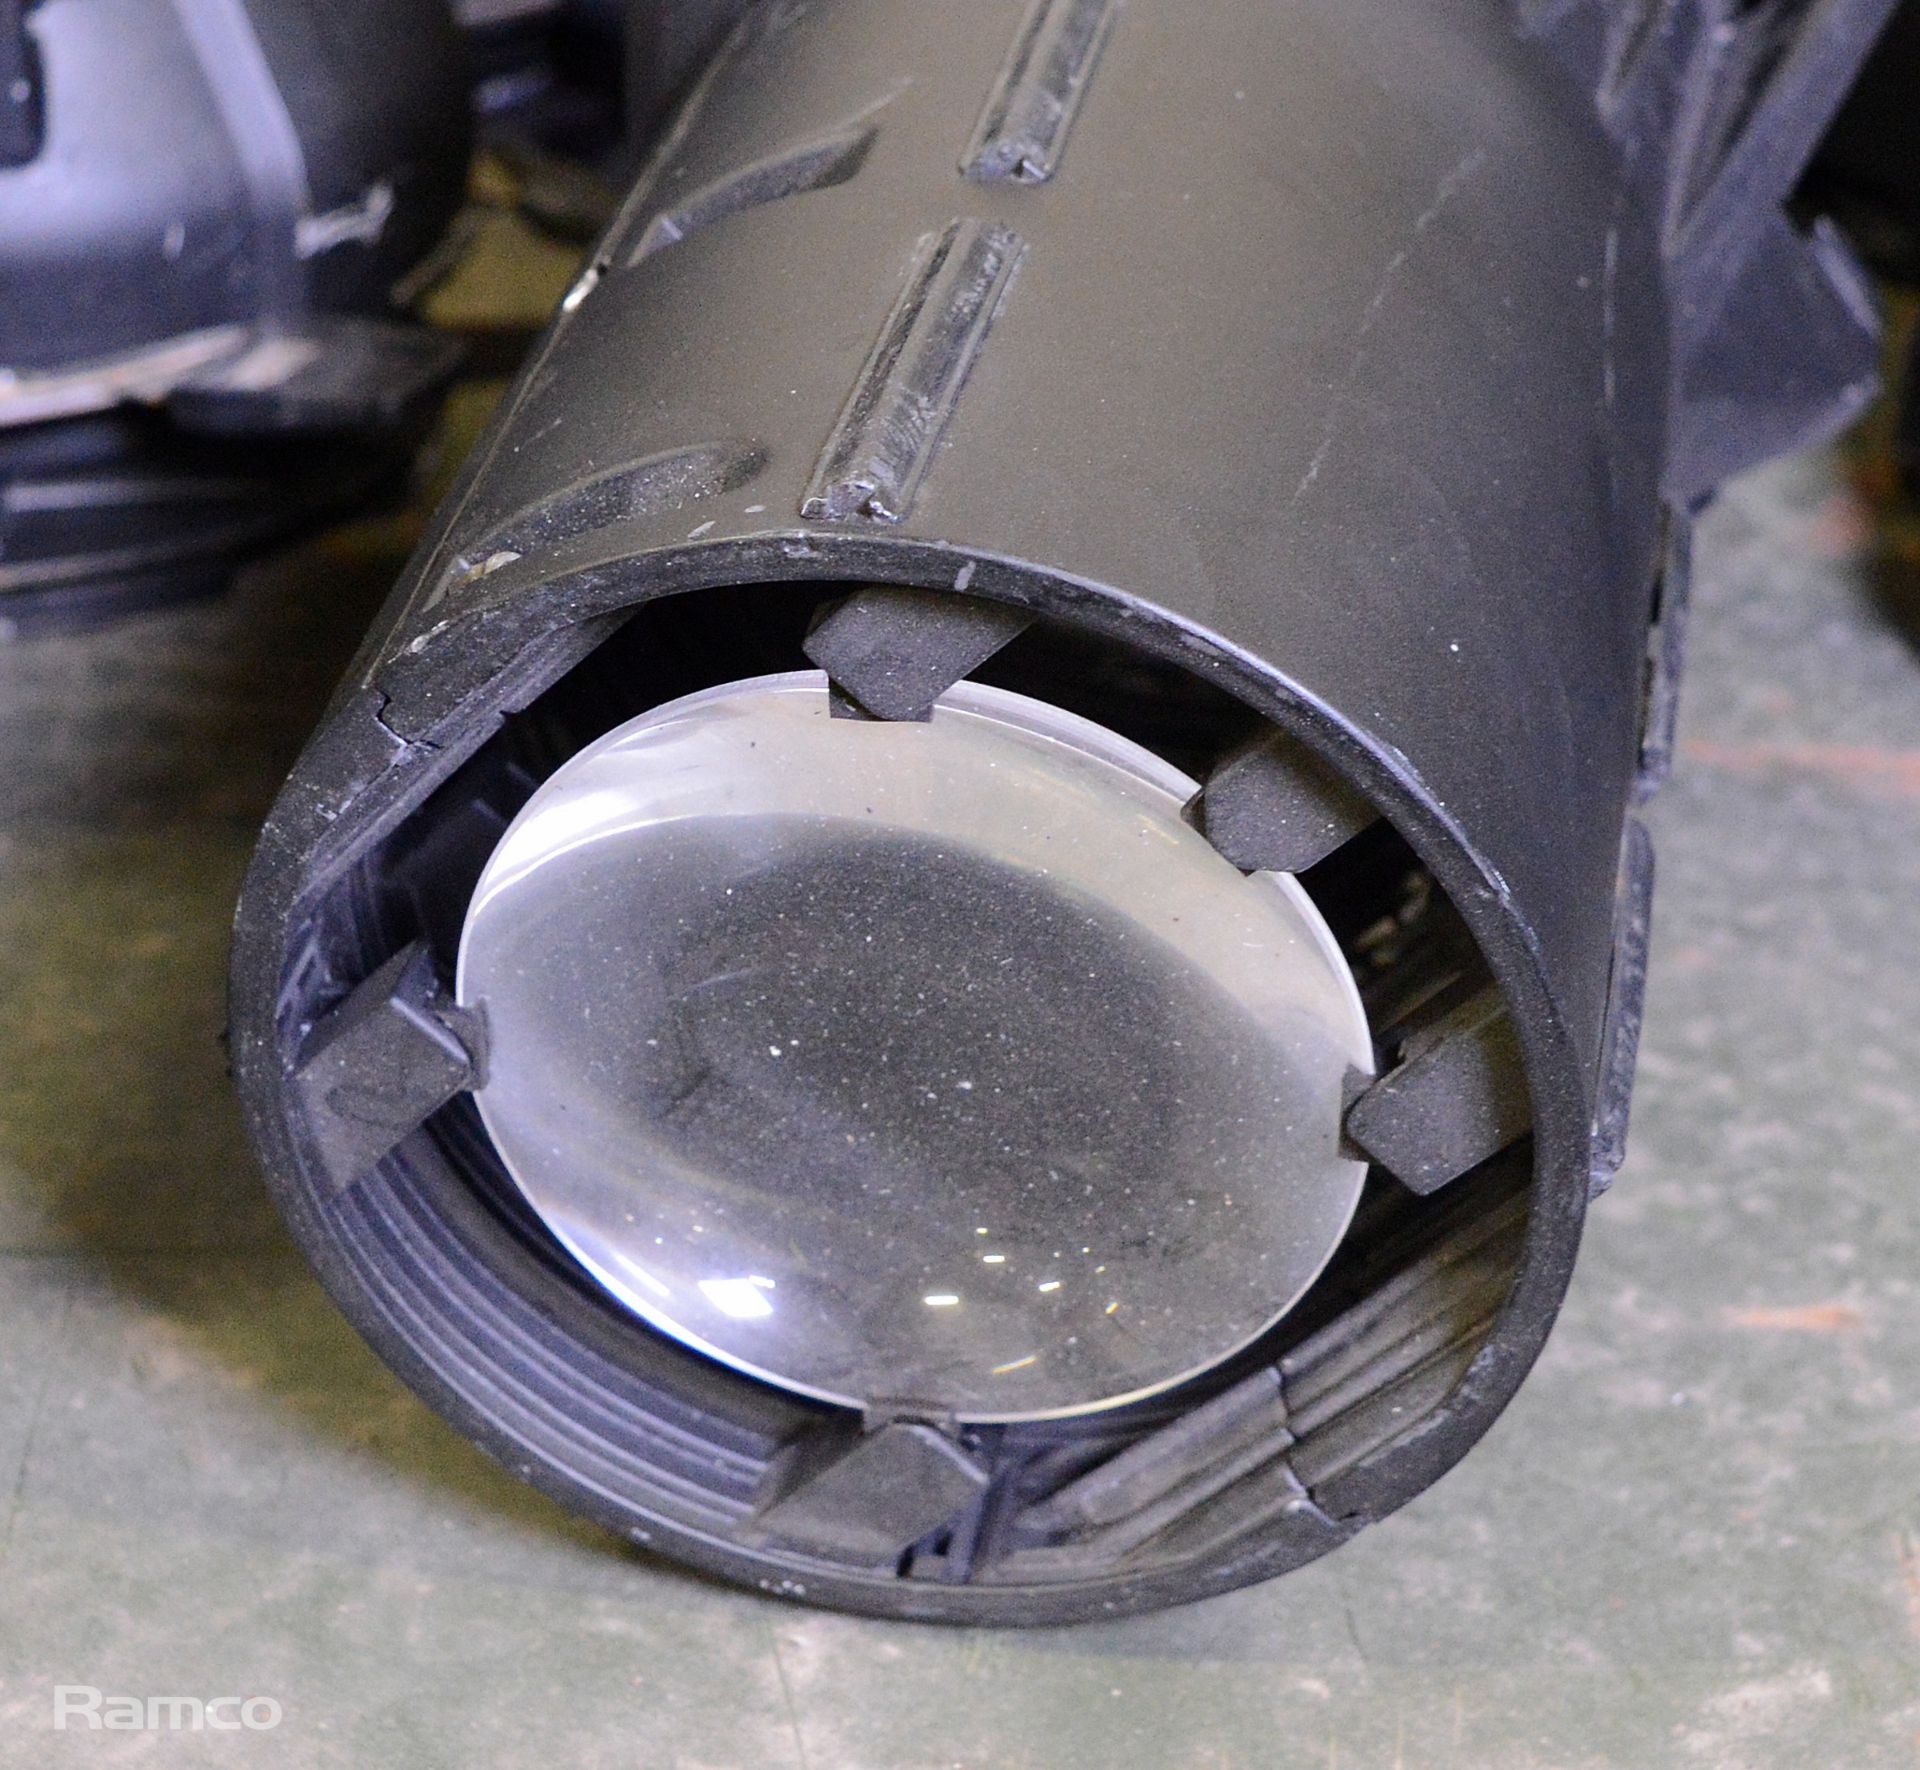 ETC Source Four Ellipsoidal 750 Luminaire Covers & Lens angle unit spares or repair - Image 6 of 8